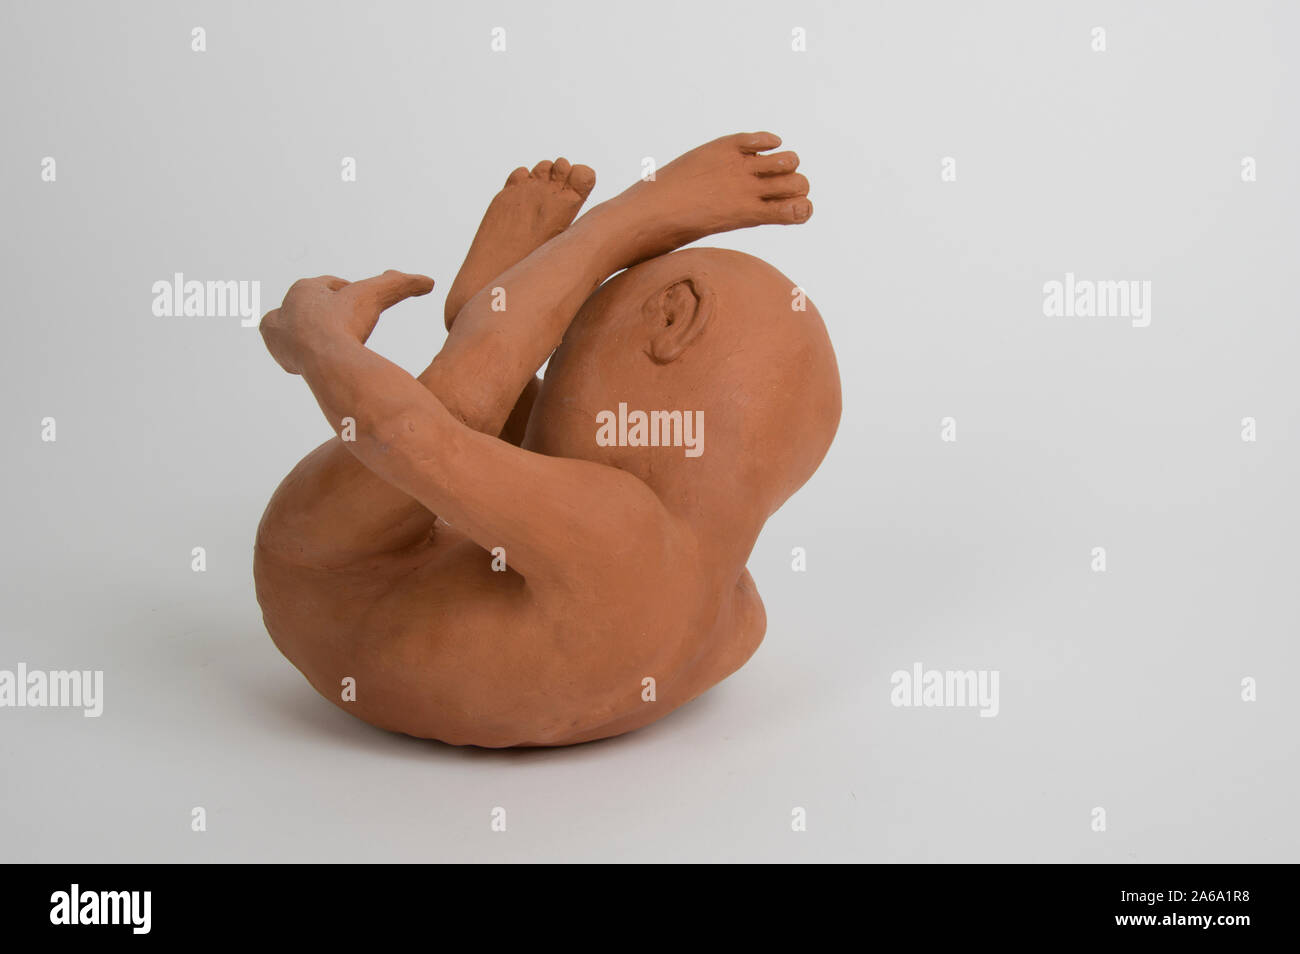 Clay figure of a newborn baby curled up in a fetal position Stock Photo